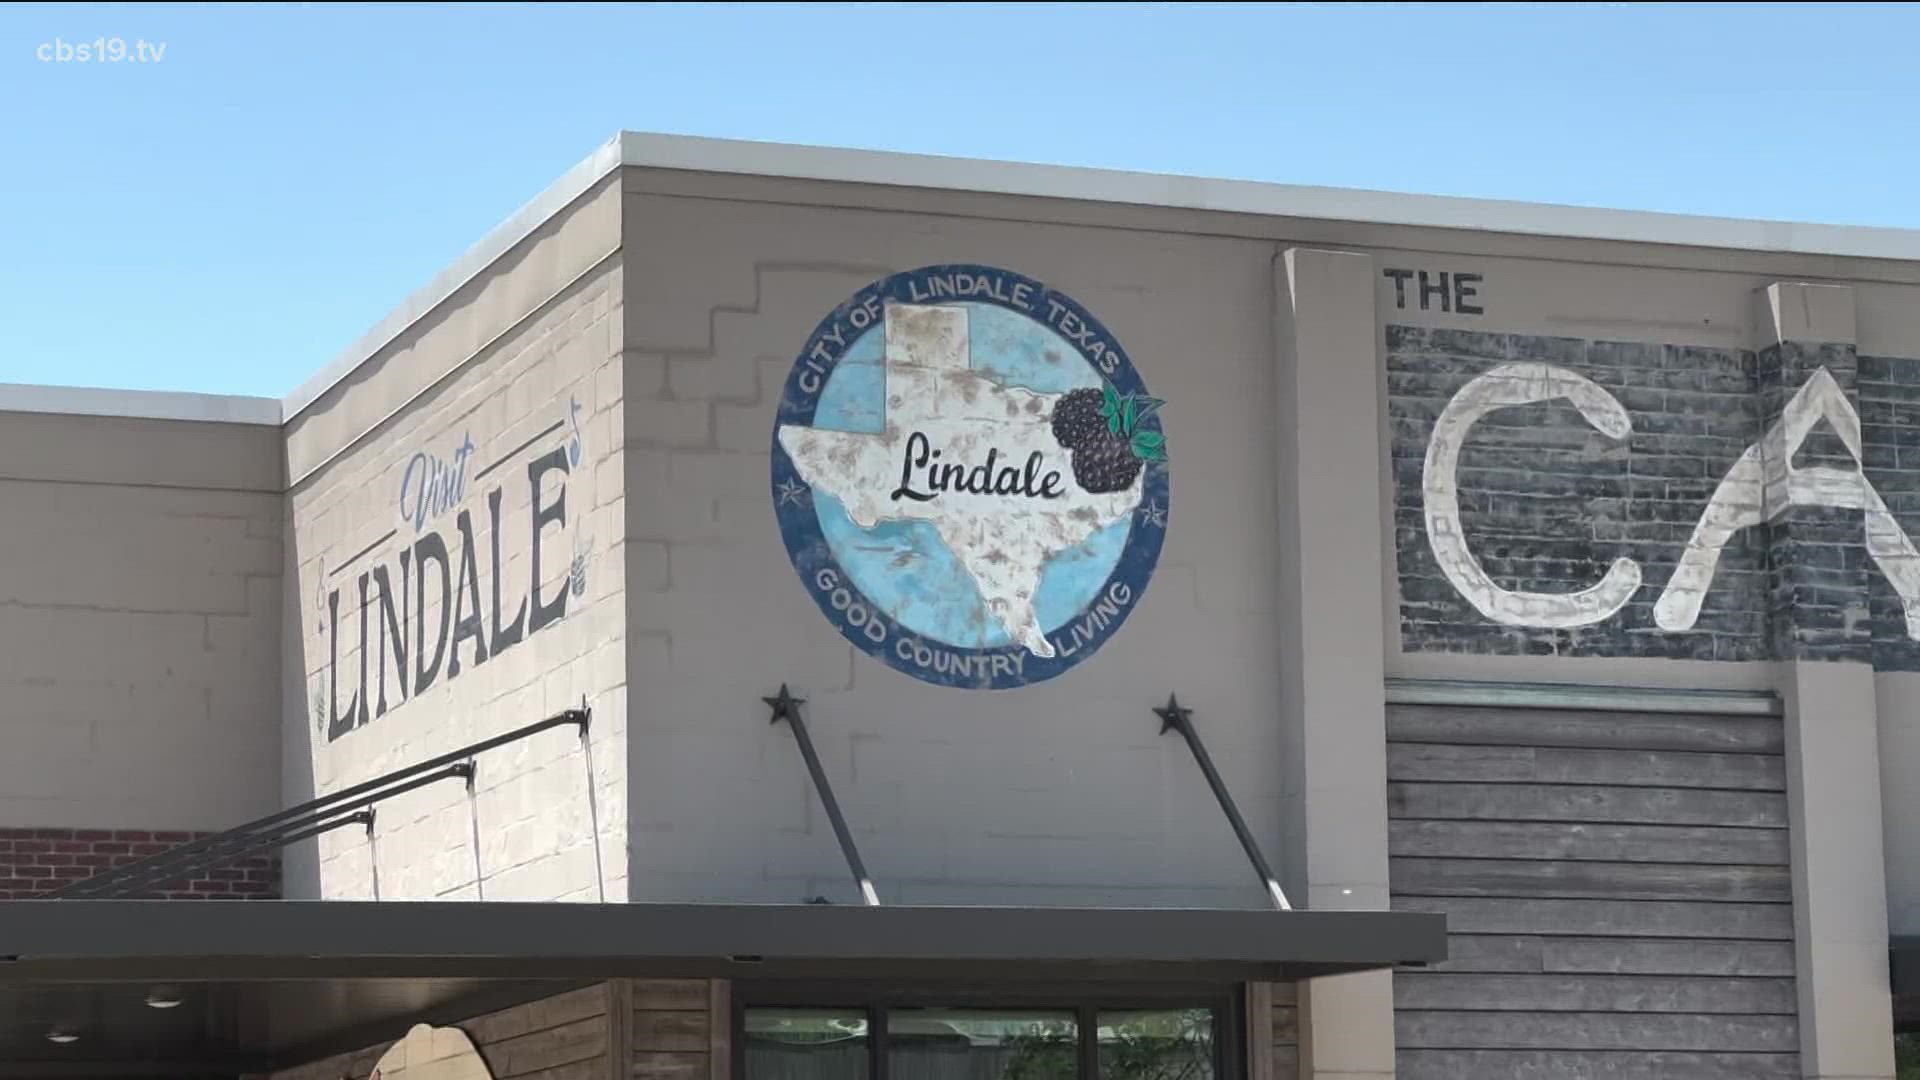 East Texas is growing, and with growth often comes a worry that those small town virtues will go away. Lindale is doing both: growing and staying true to its roots.